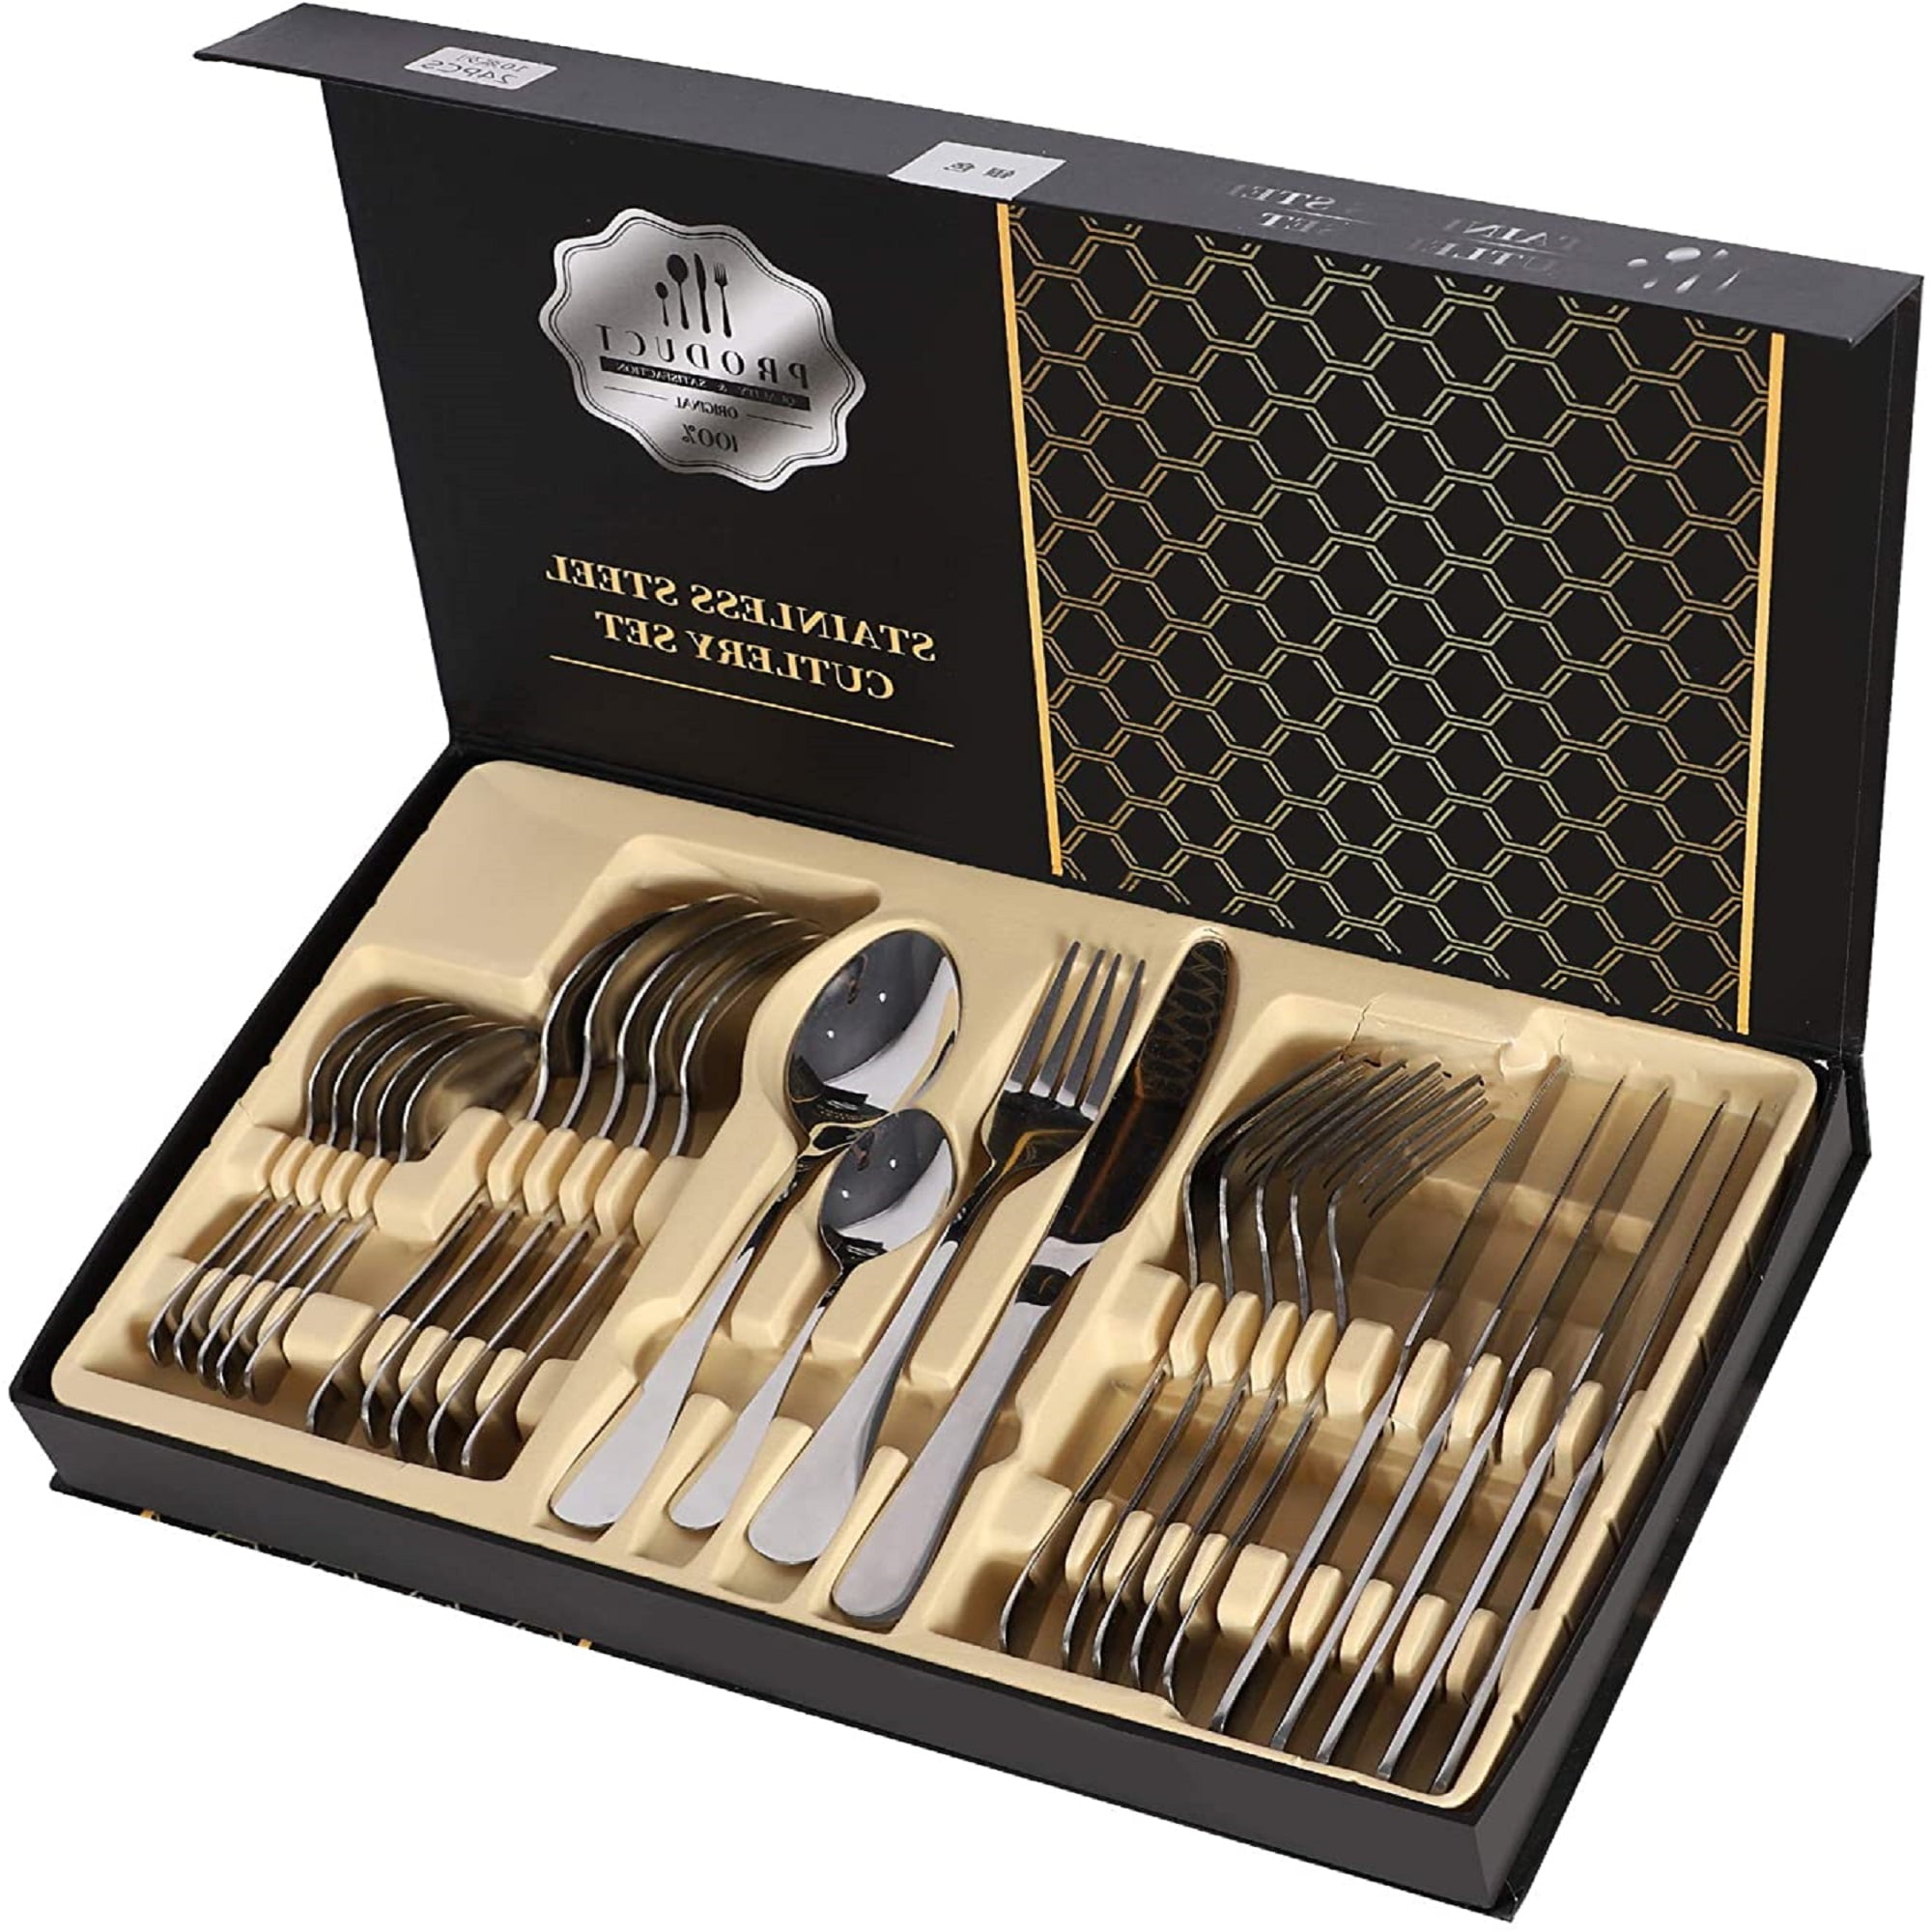 Hive Stainless Steel Cutlery Sets 16/ 24 /32 piece Gold,Black,Rainbow Iridescent 